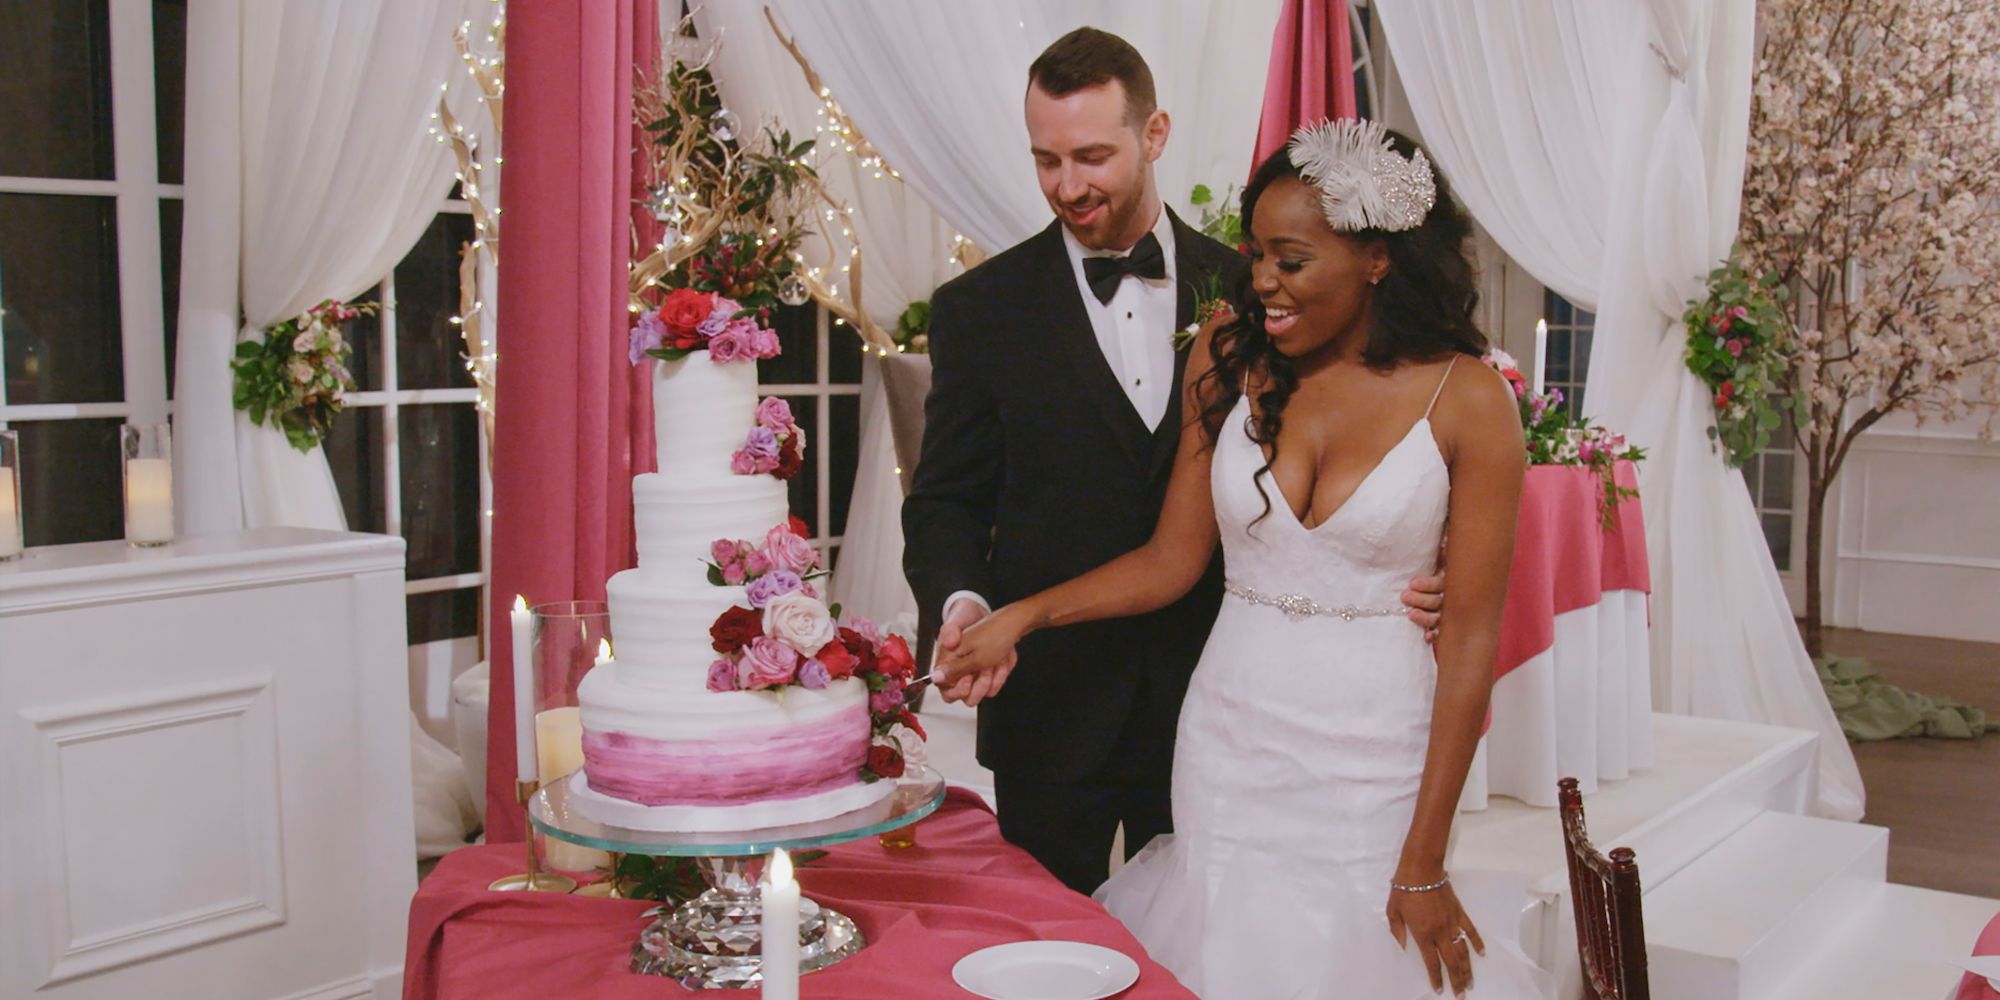 Cameron and Lauren standing next to their cake on their wedding day on Love Is Blind